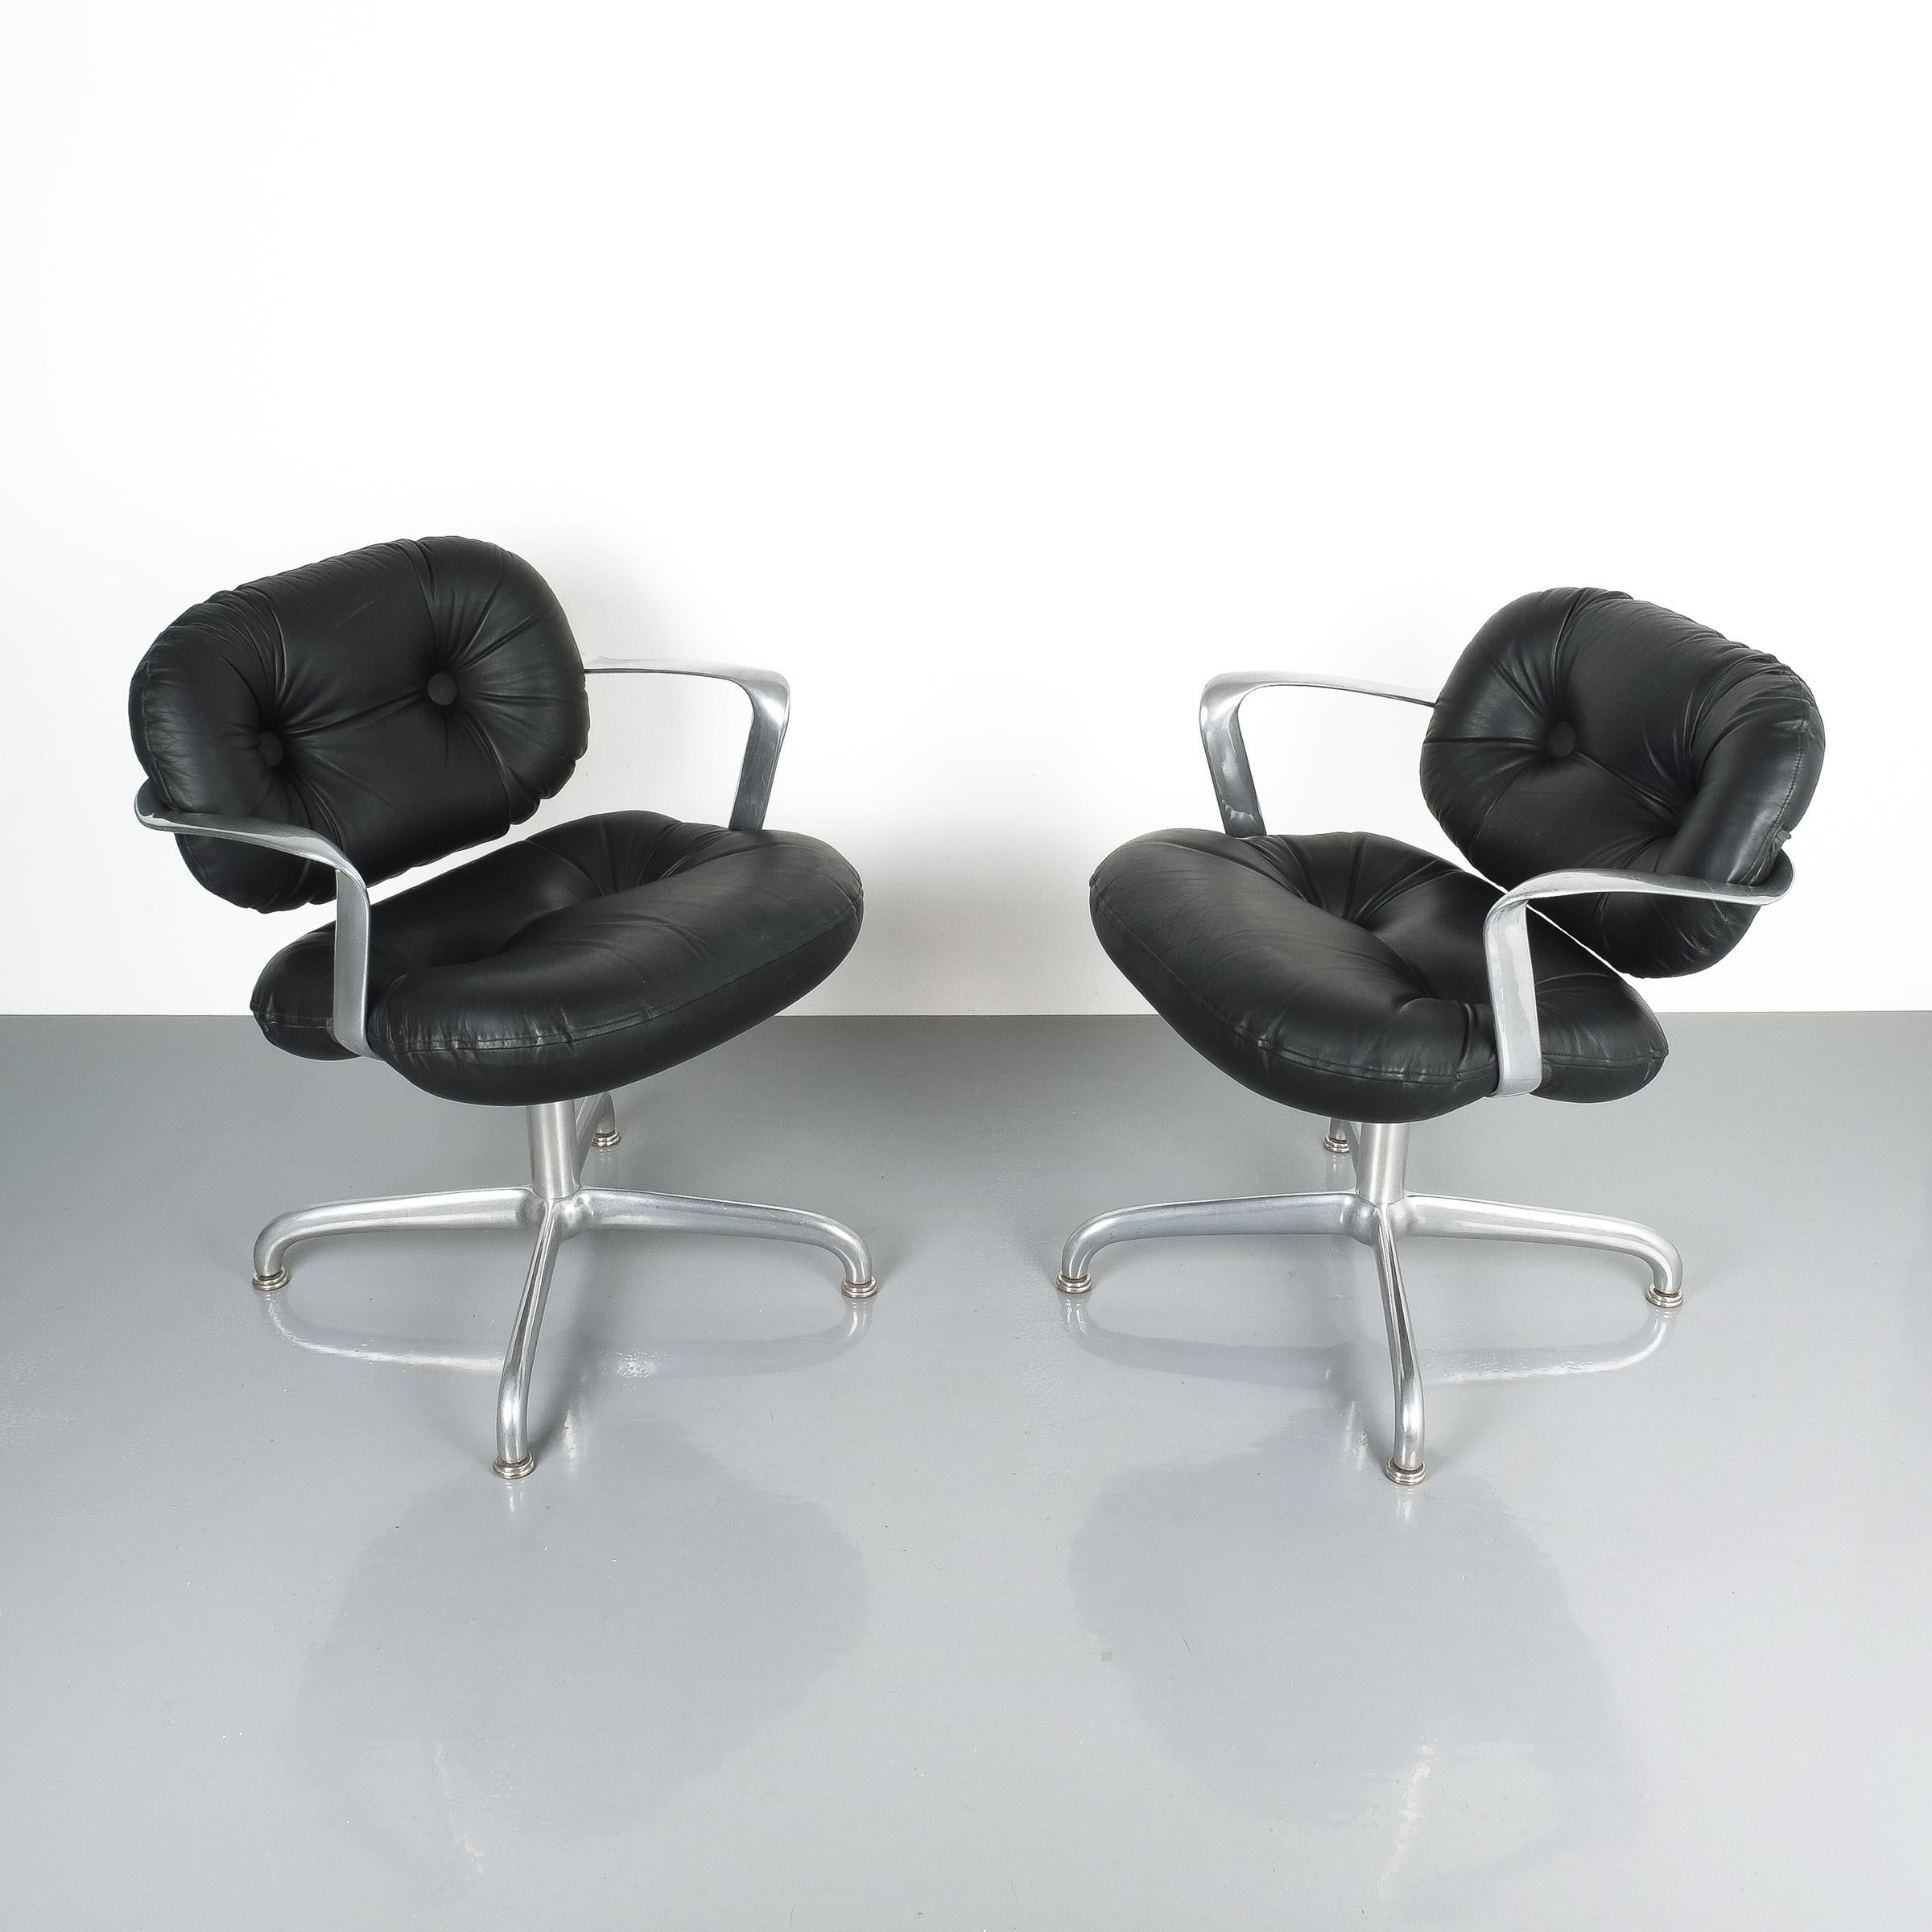 American Pair of Morrison and Hannah Knoll Office Chair Aluminium Black Leather